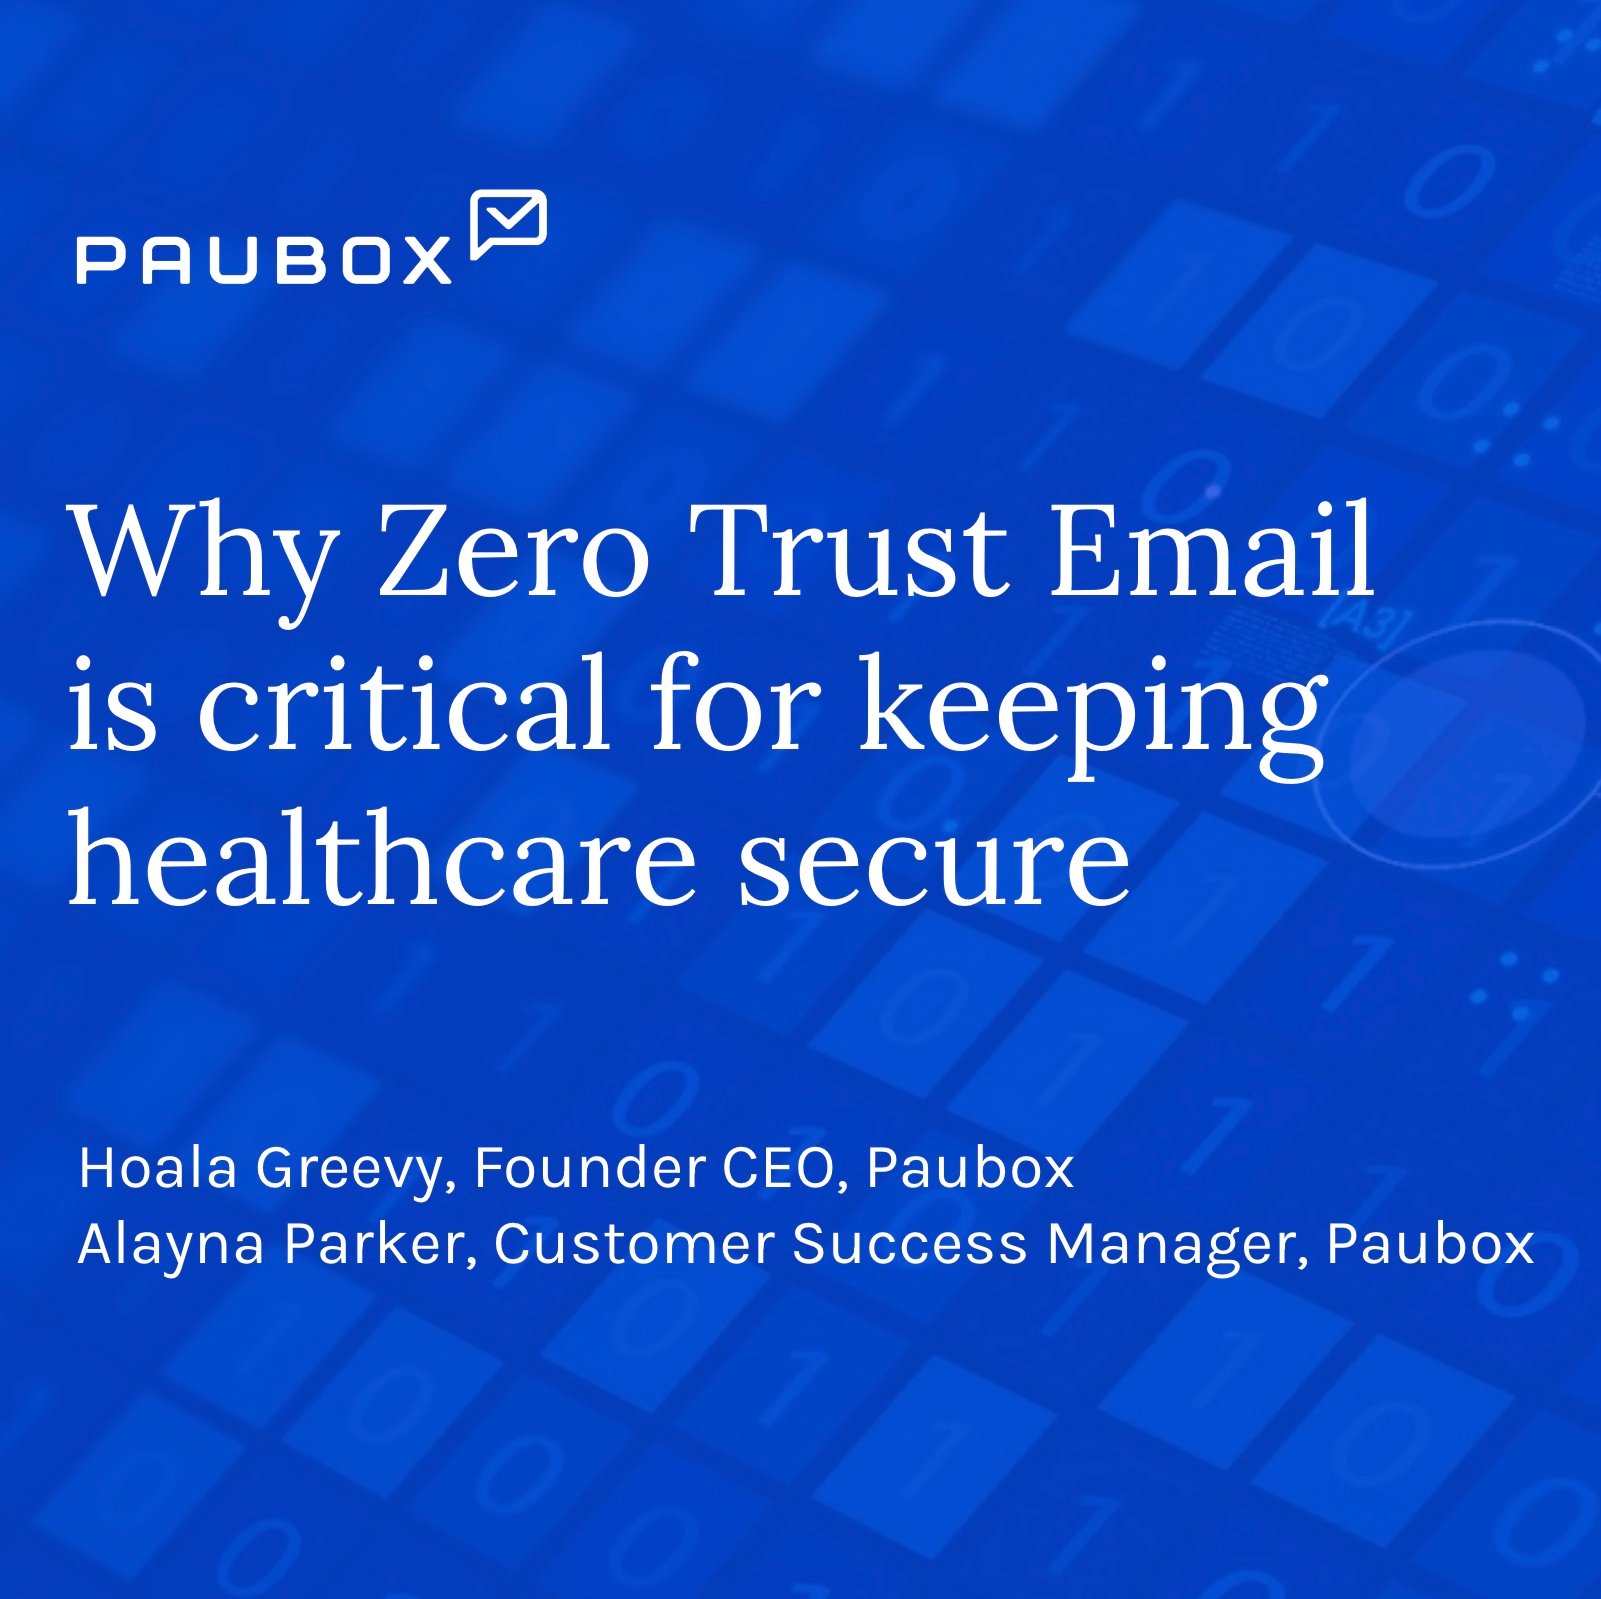 Adopting a zero trust email policy is essential for healthcare